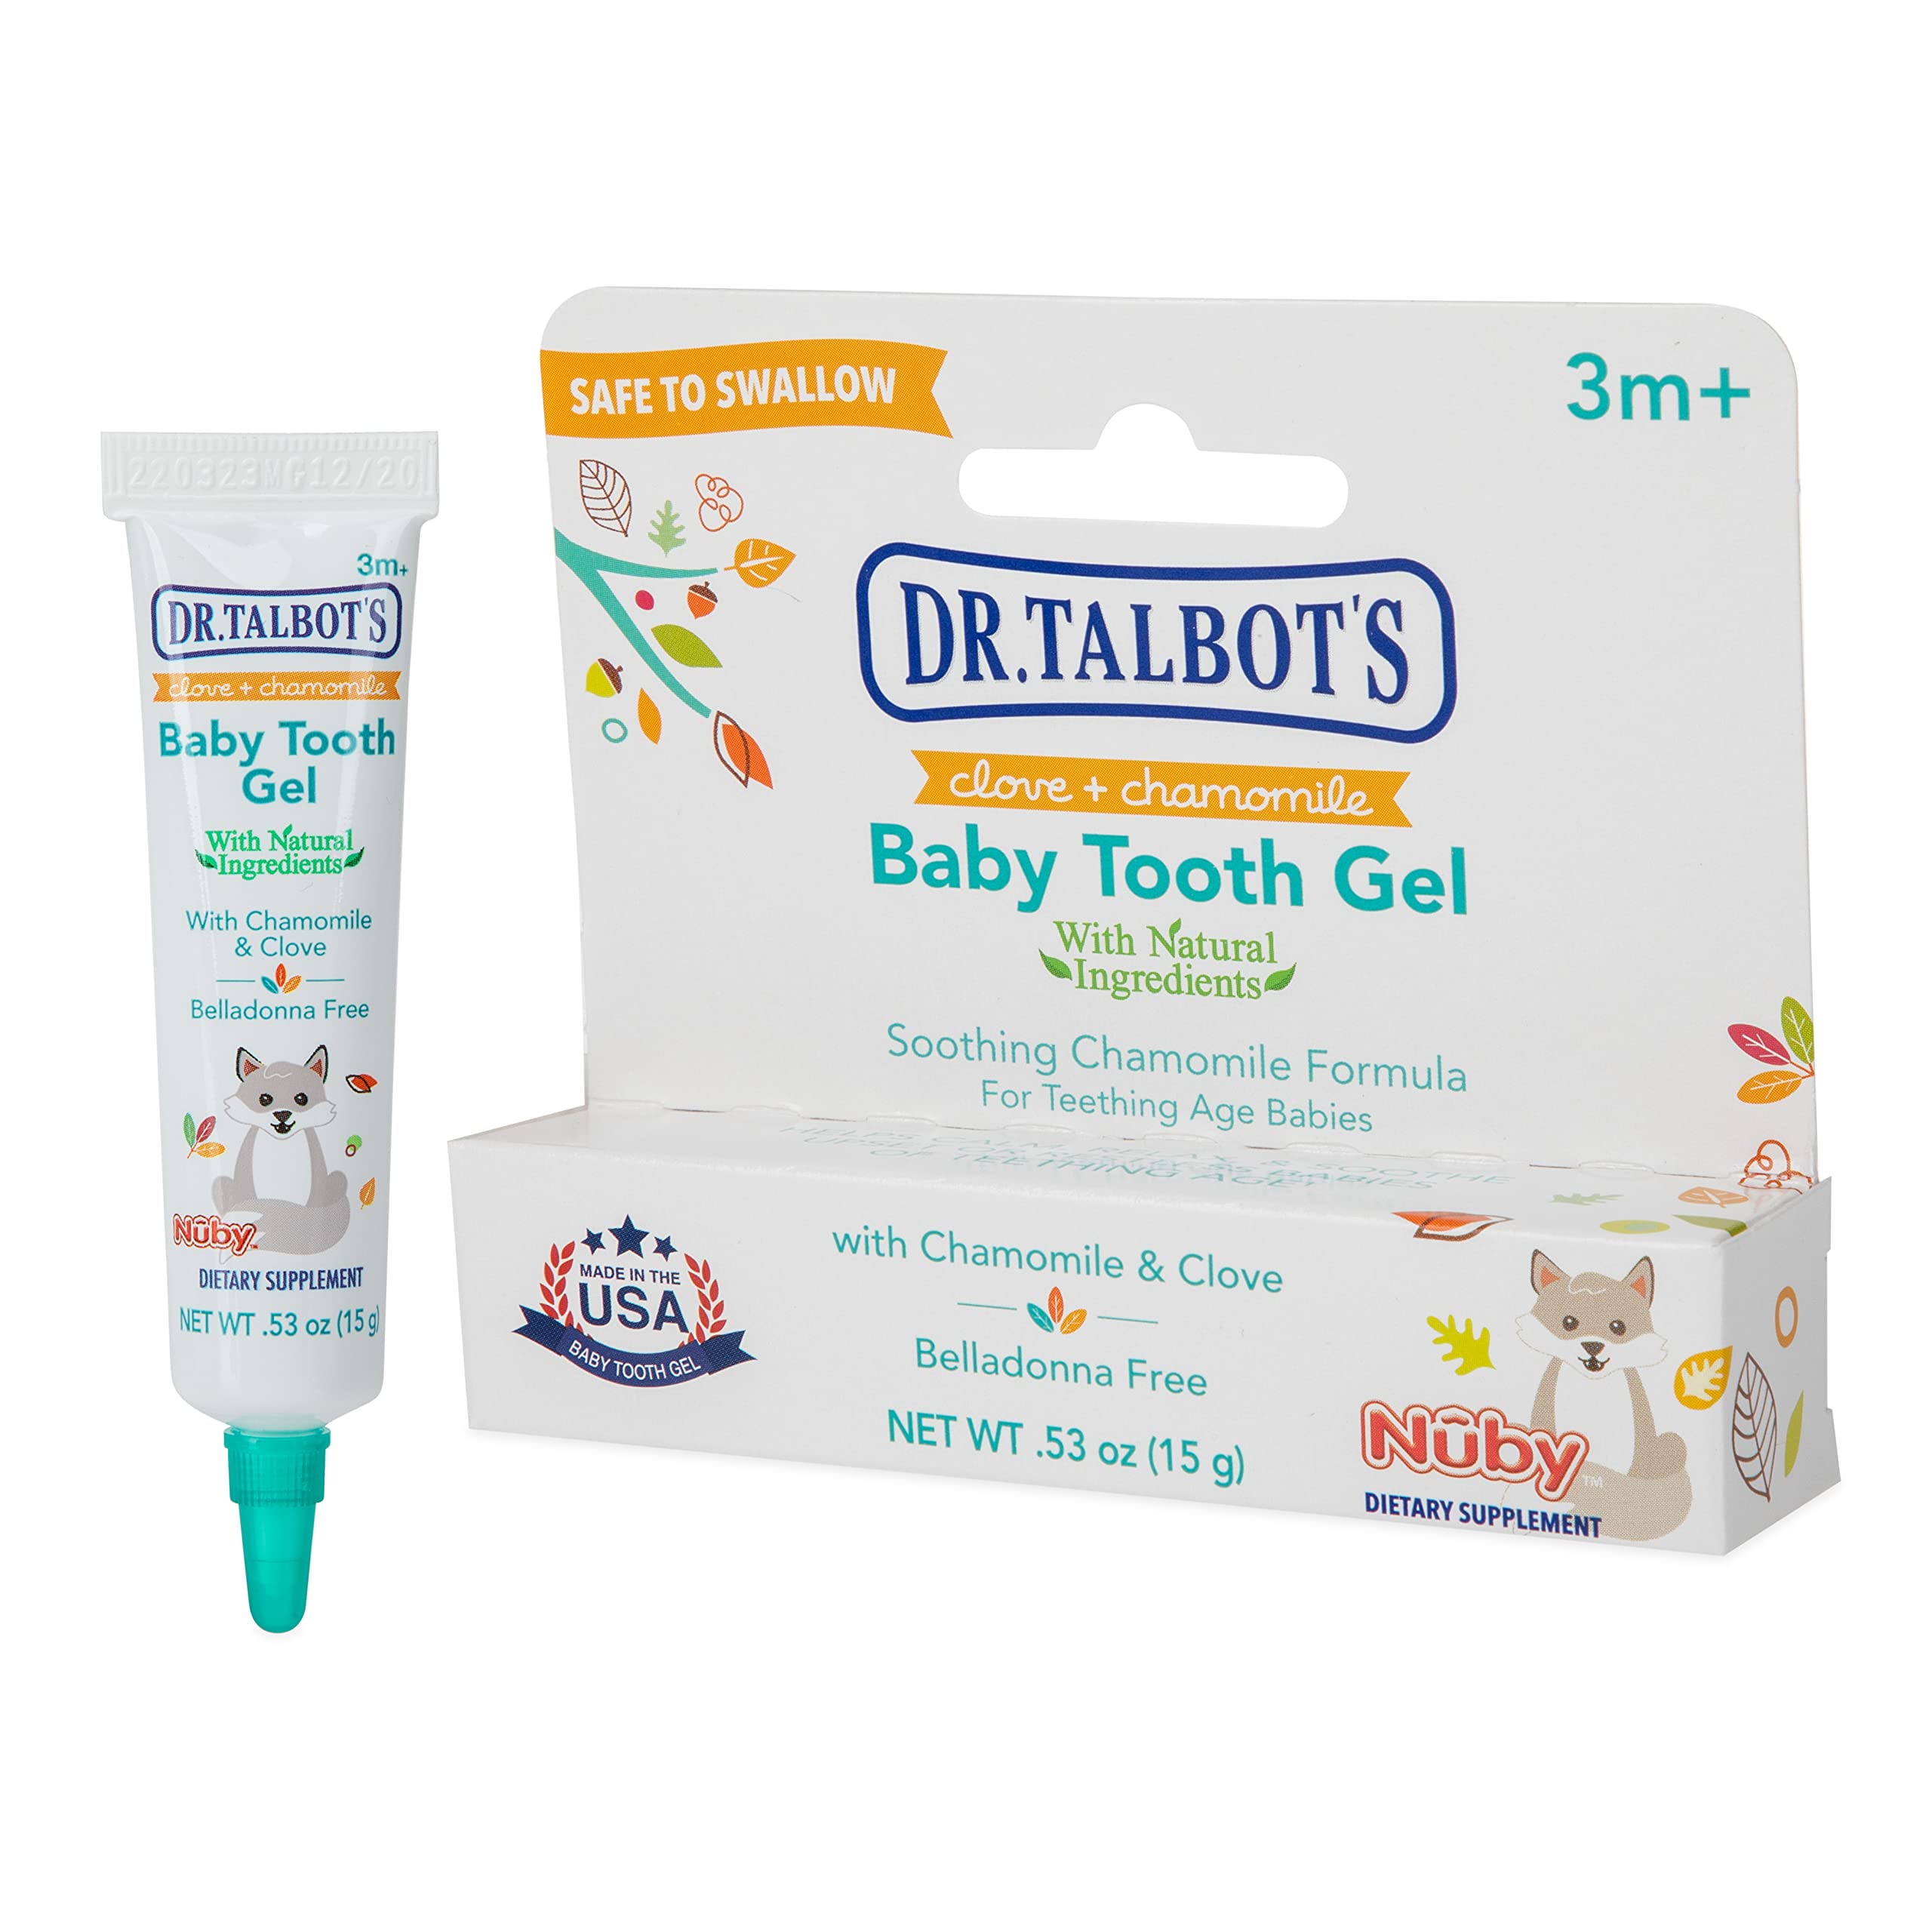 Nuby by Dr. Talbot's Baby Tooth Gel for Sore Gums, Naturally Inspired, Benzocaine Free, Belladonna